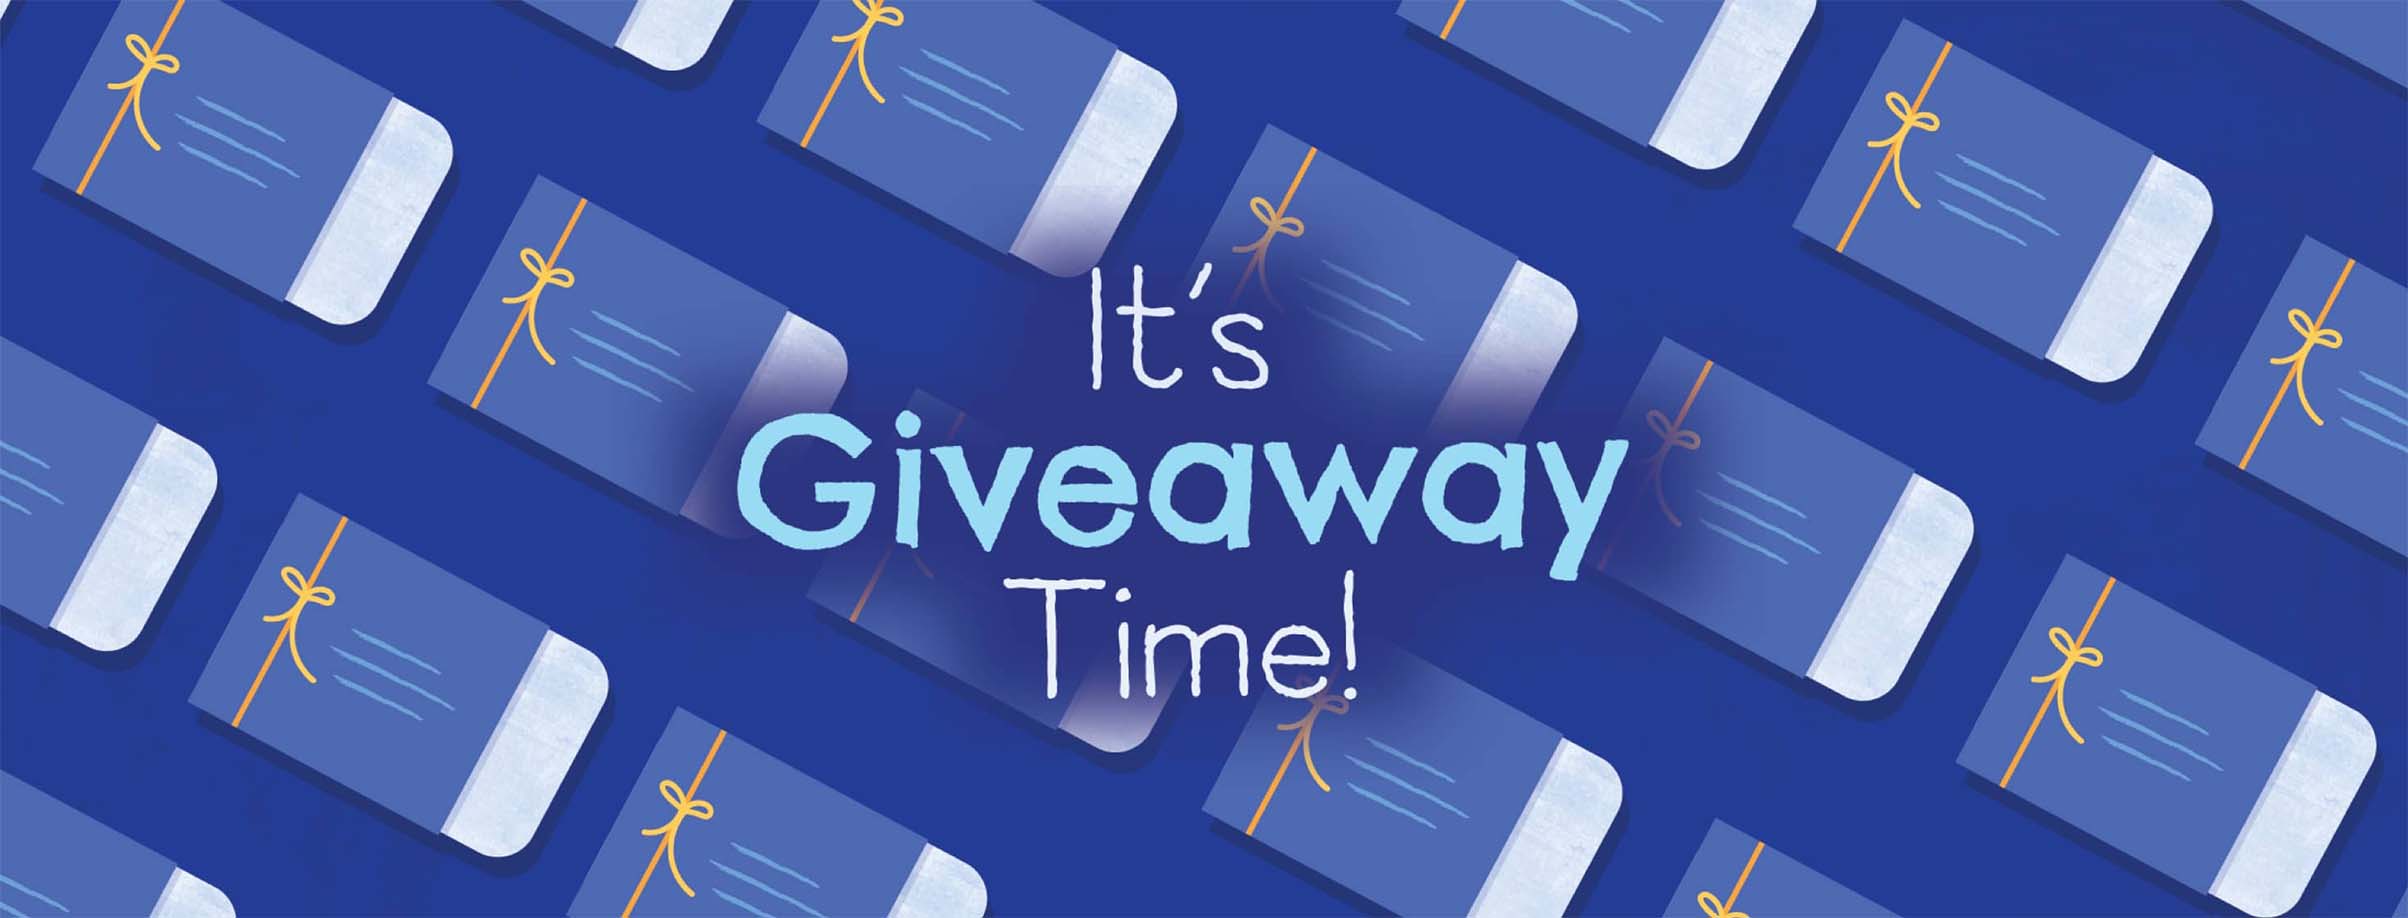 Giveaway announcement featuring gift cards